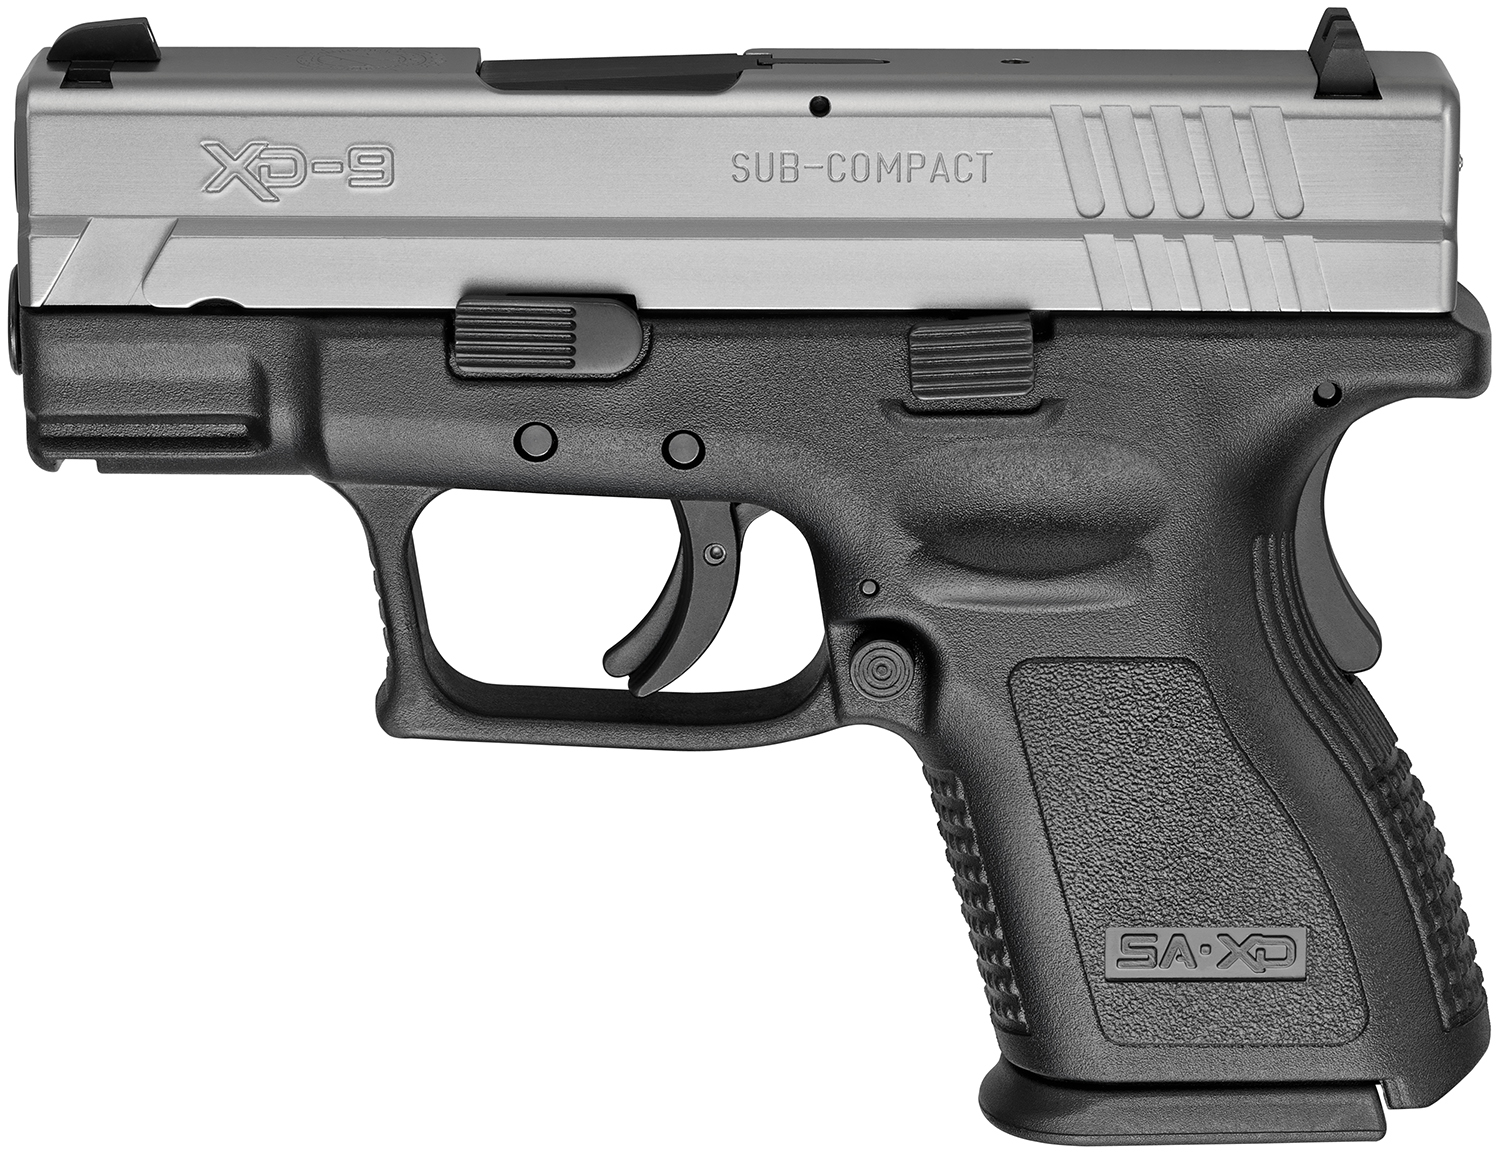 Generating your retailer media packet for the XD ® 3" Sub-Compact 9mm ...